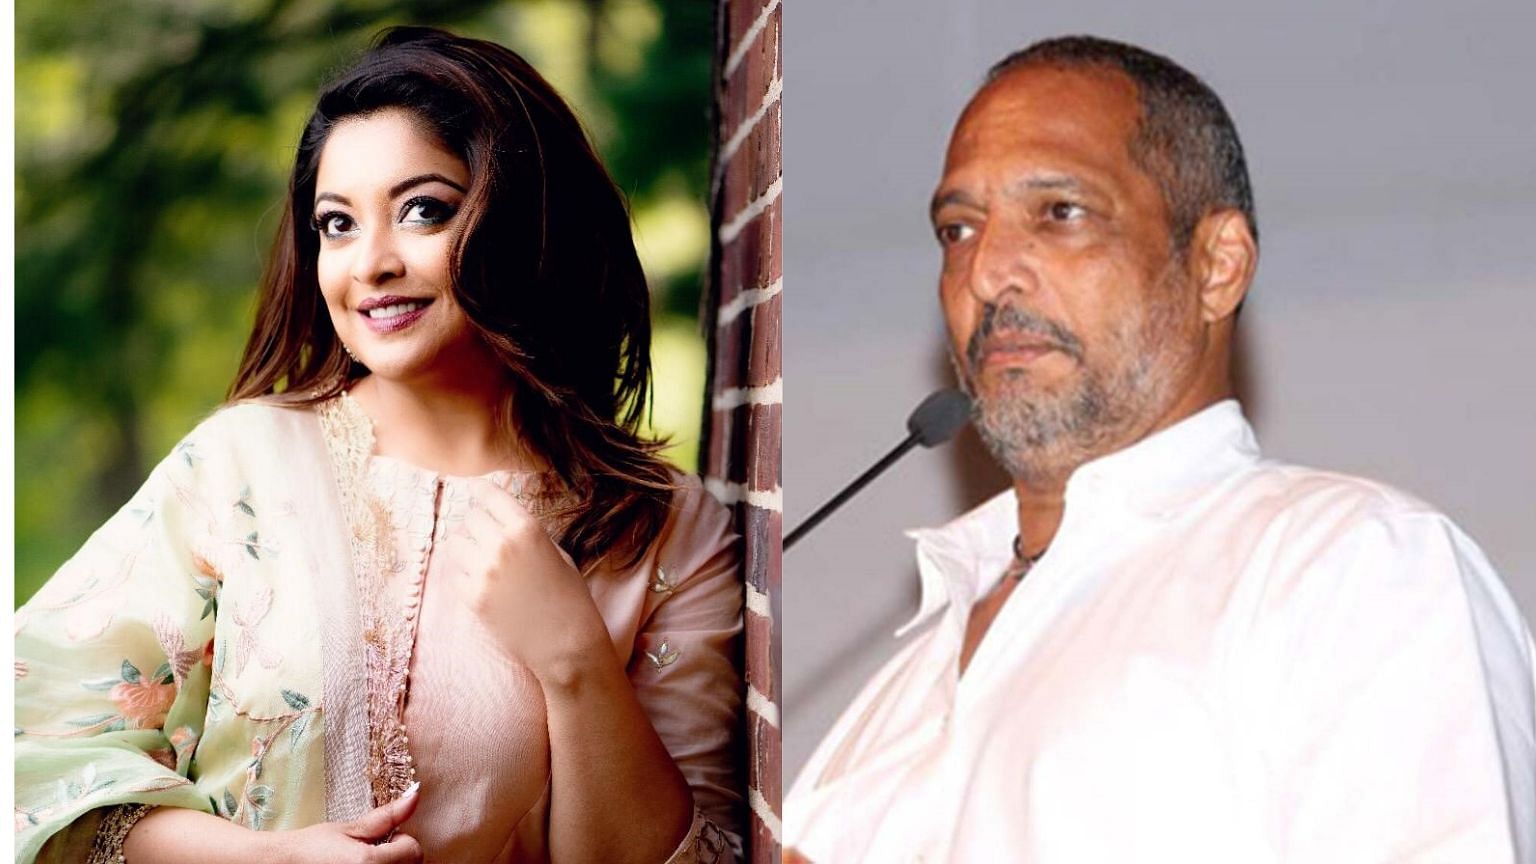 Tanushree Dutta says there is enough evidence to prove harassment charges against Nana Patekar.&nbsp;